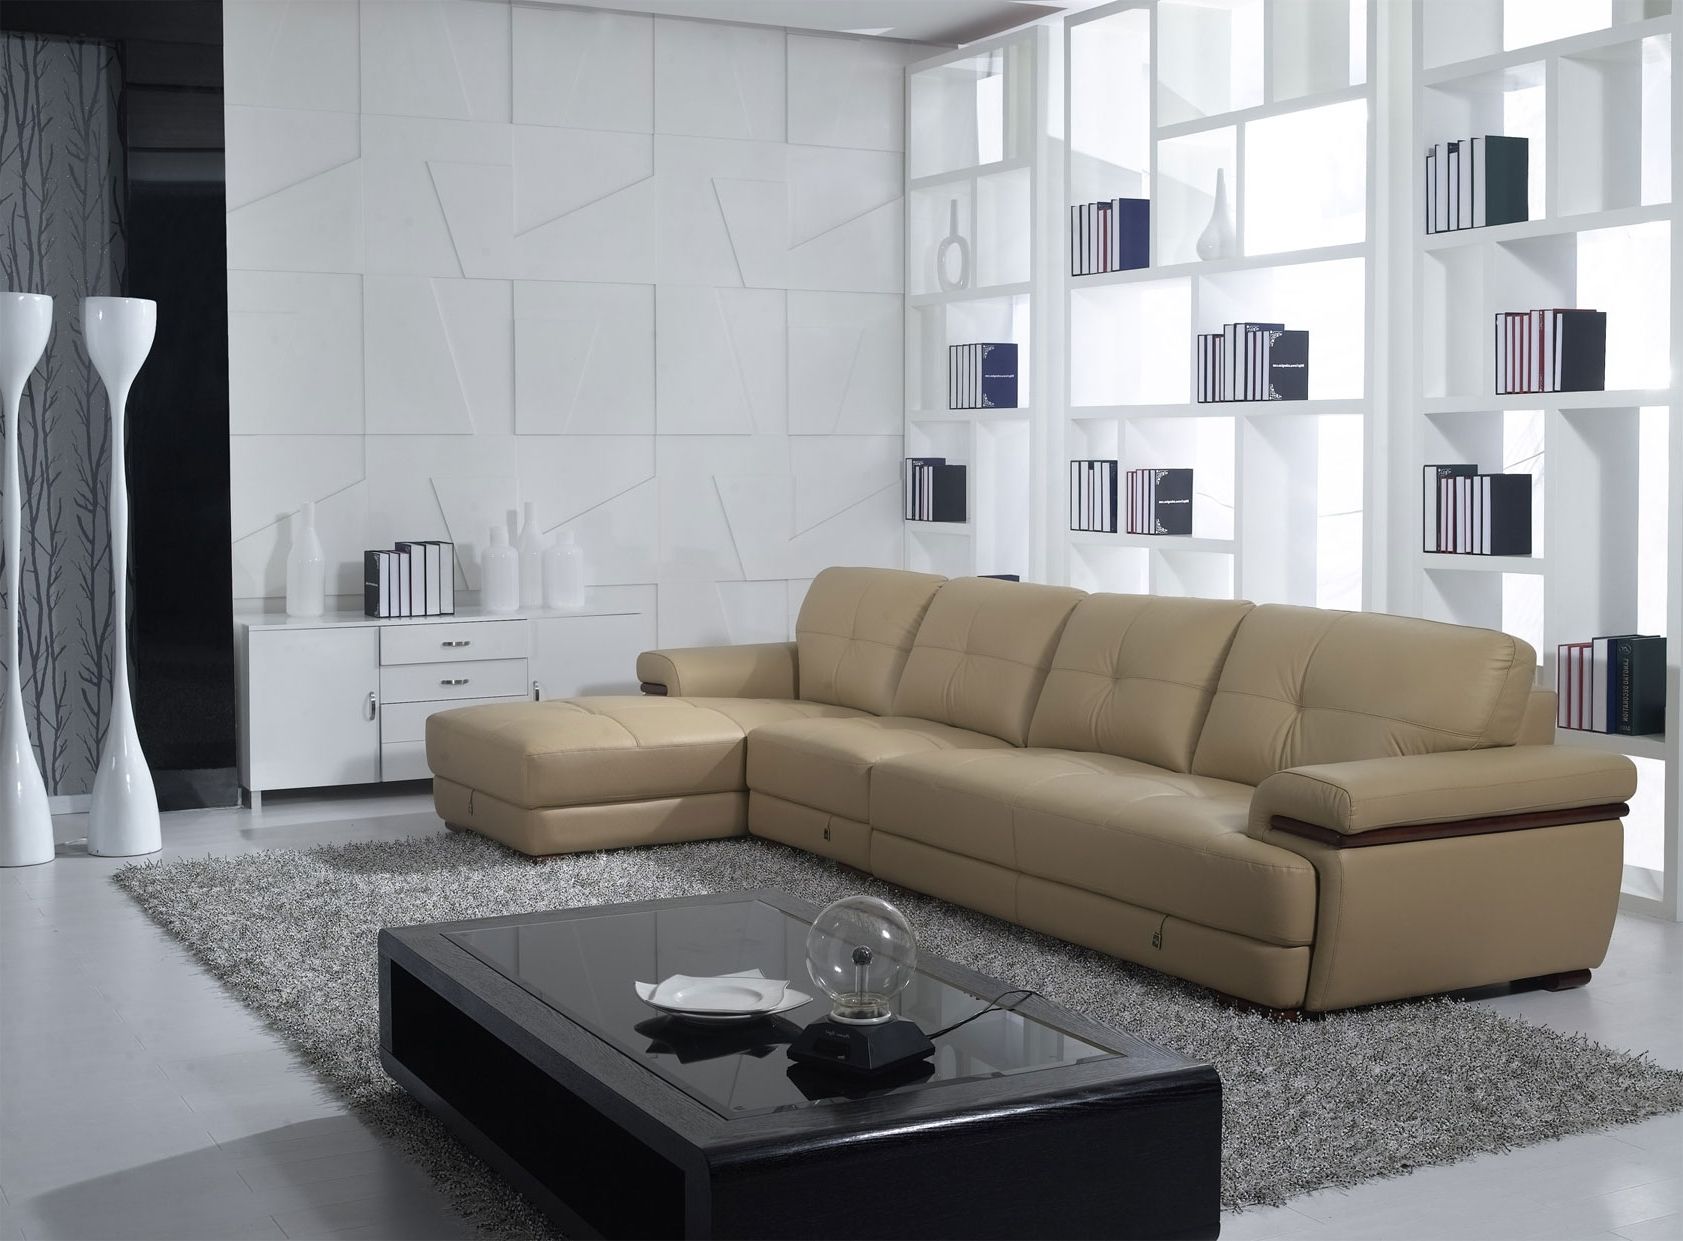 Recent Good Quality Sectional Sofas Throughout Fancy Quality Sectional Sofas 15 Sofas And Couches Ideas With (View 2 of 15)